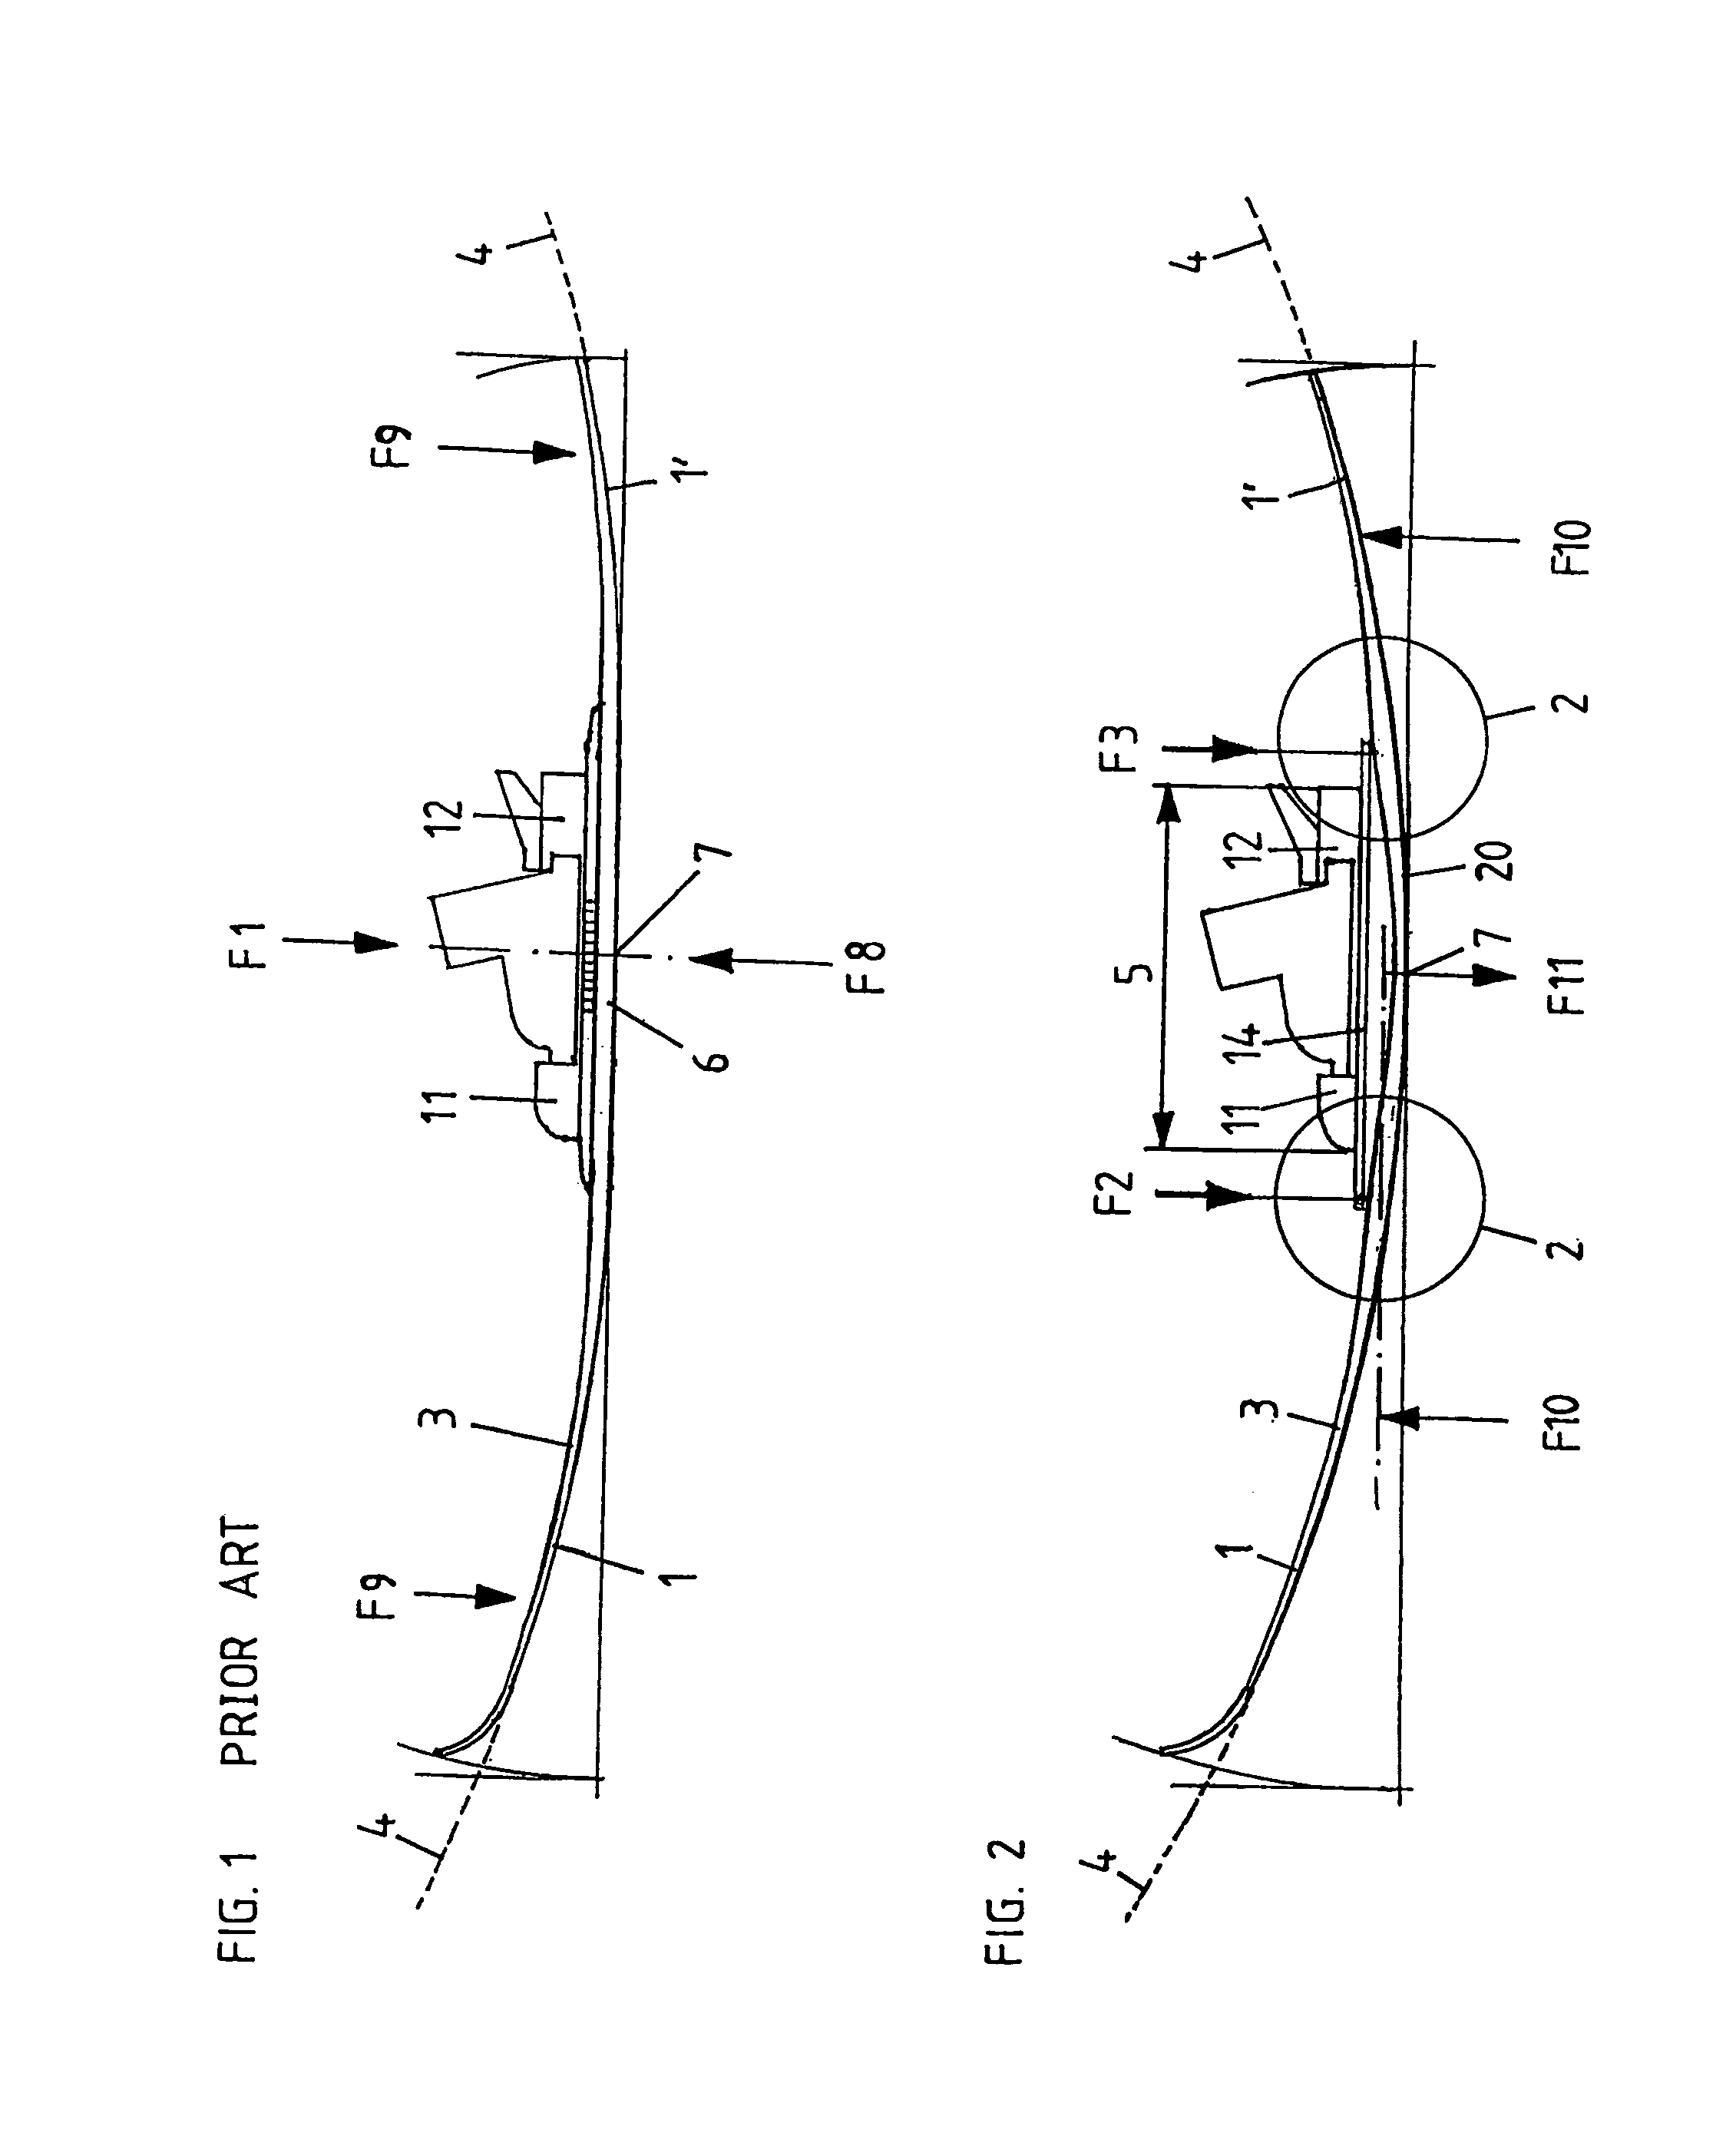 Ski spot apparatus with integrated force transmission system